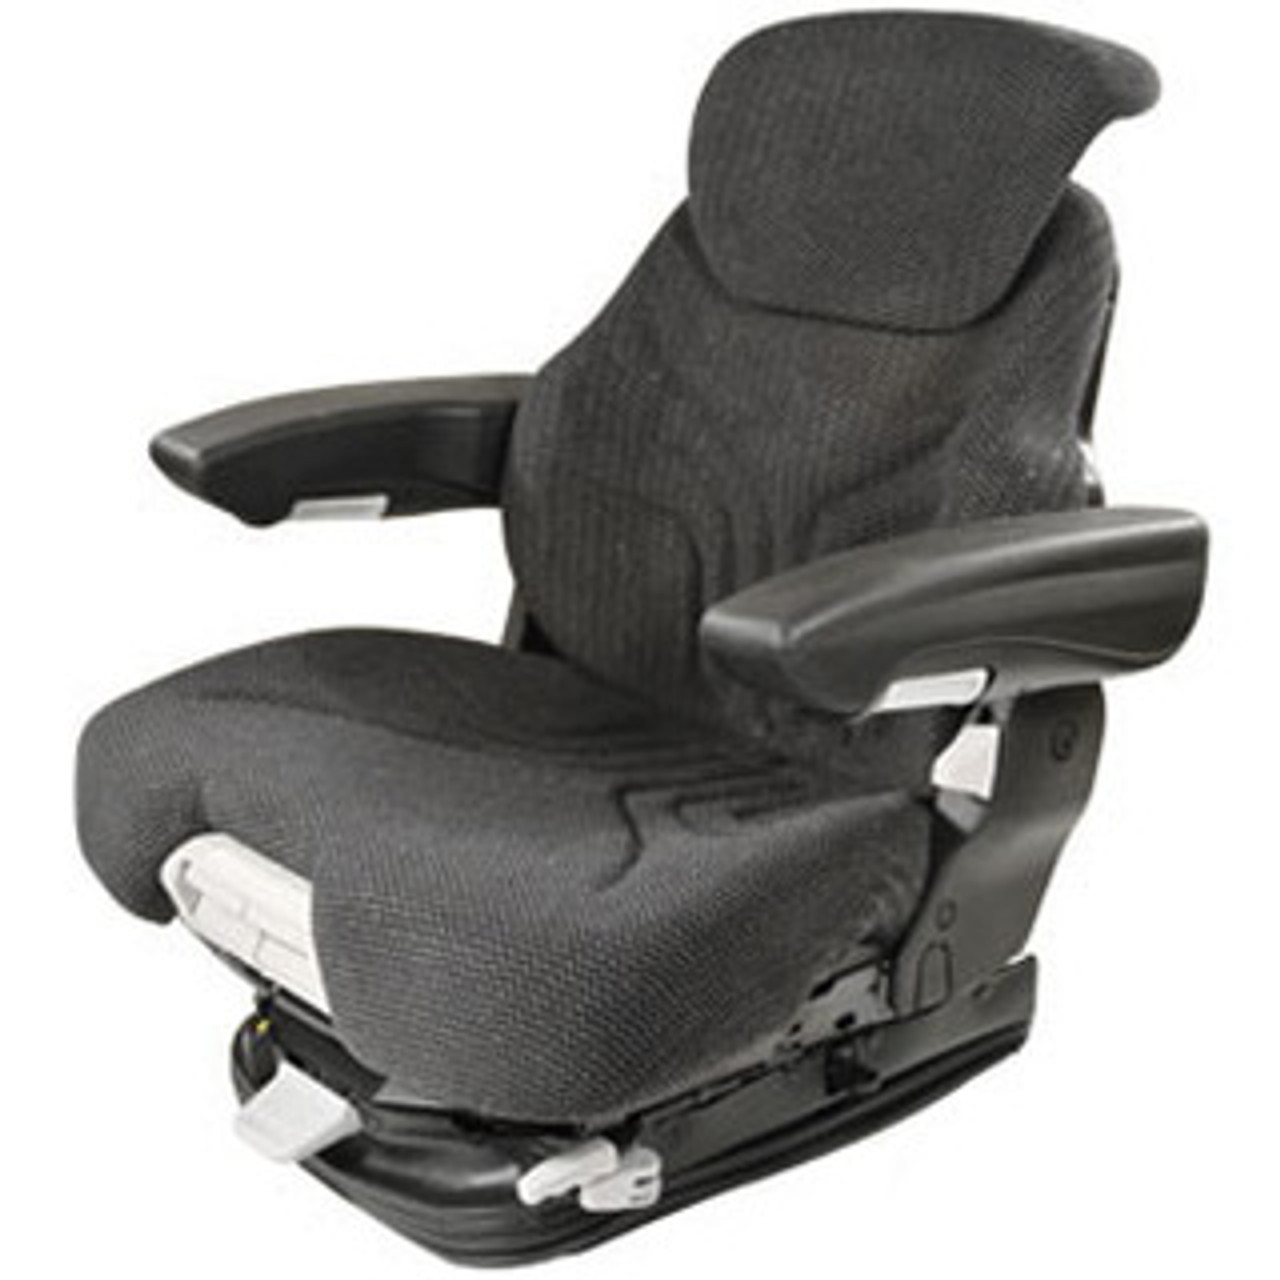 Case-IH Grammer Air Suspension Charcoal Cloth Seat with Built In Compressor # MSG95741GRC